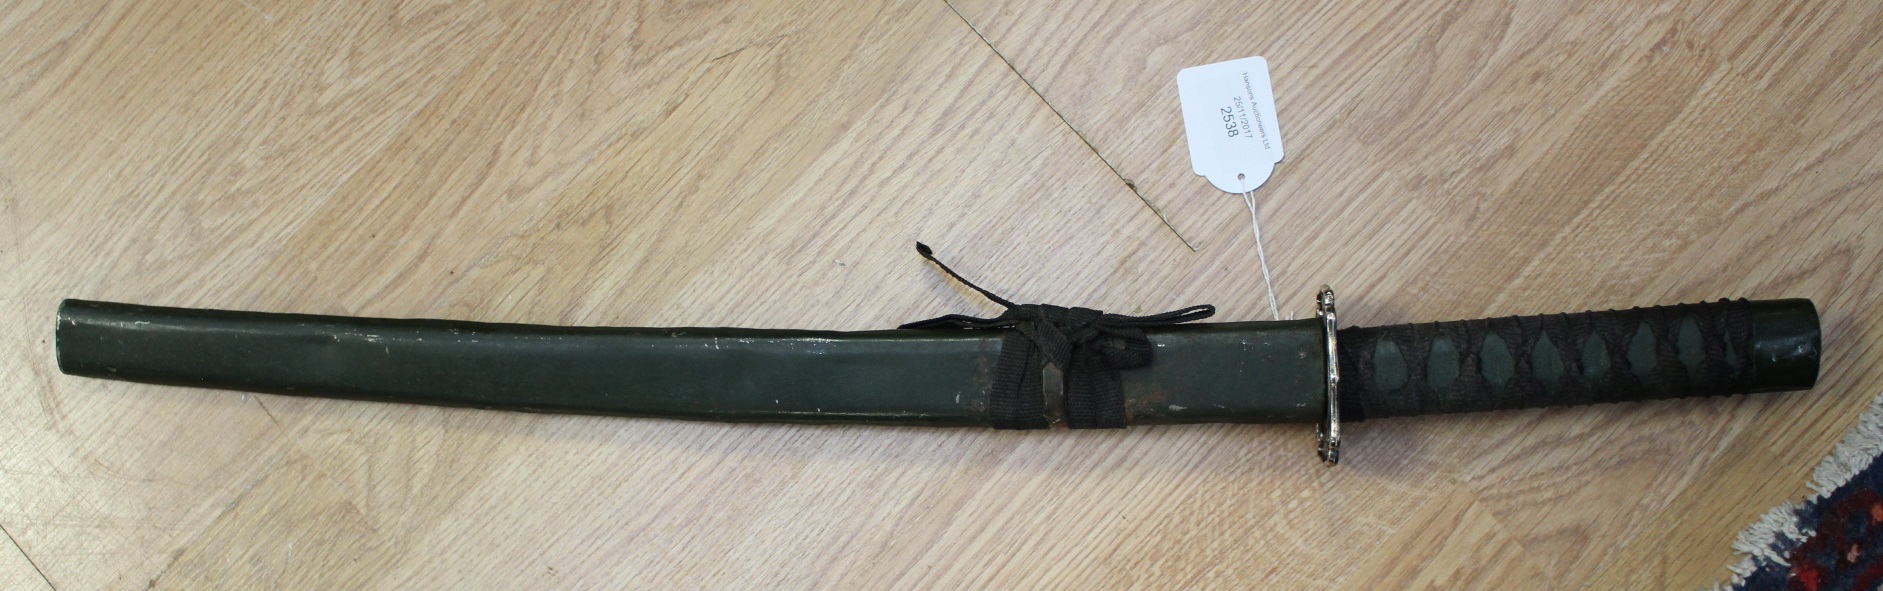 Chinese decorative short sword. 45cm long blade with fuller. Green painted steel hilt.